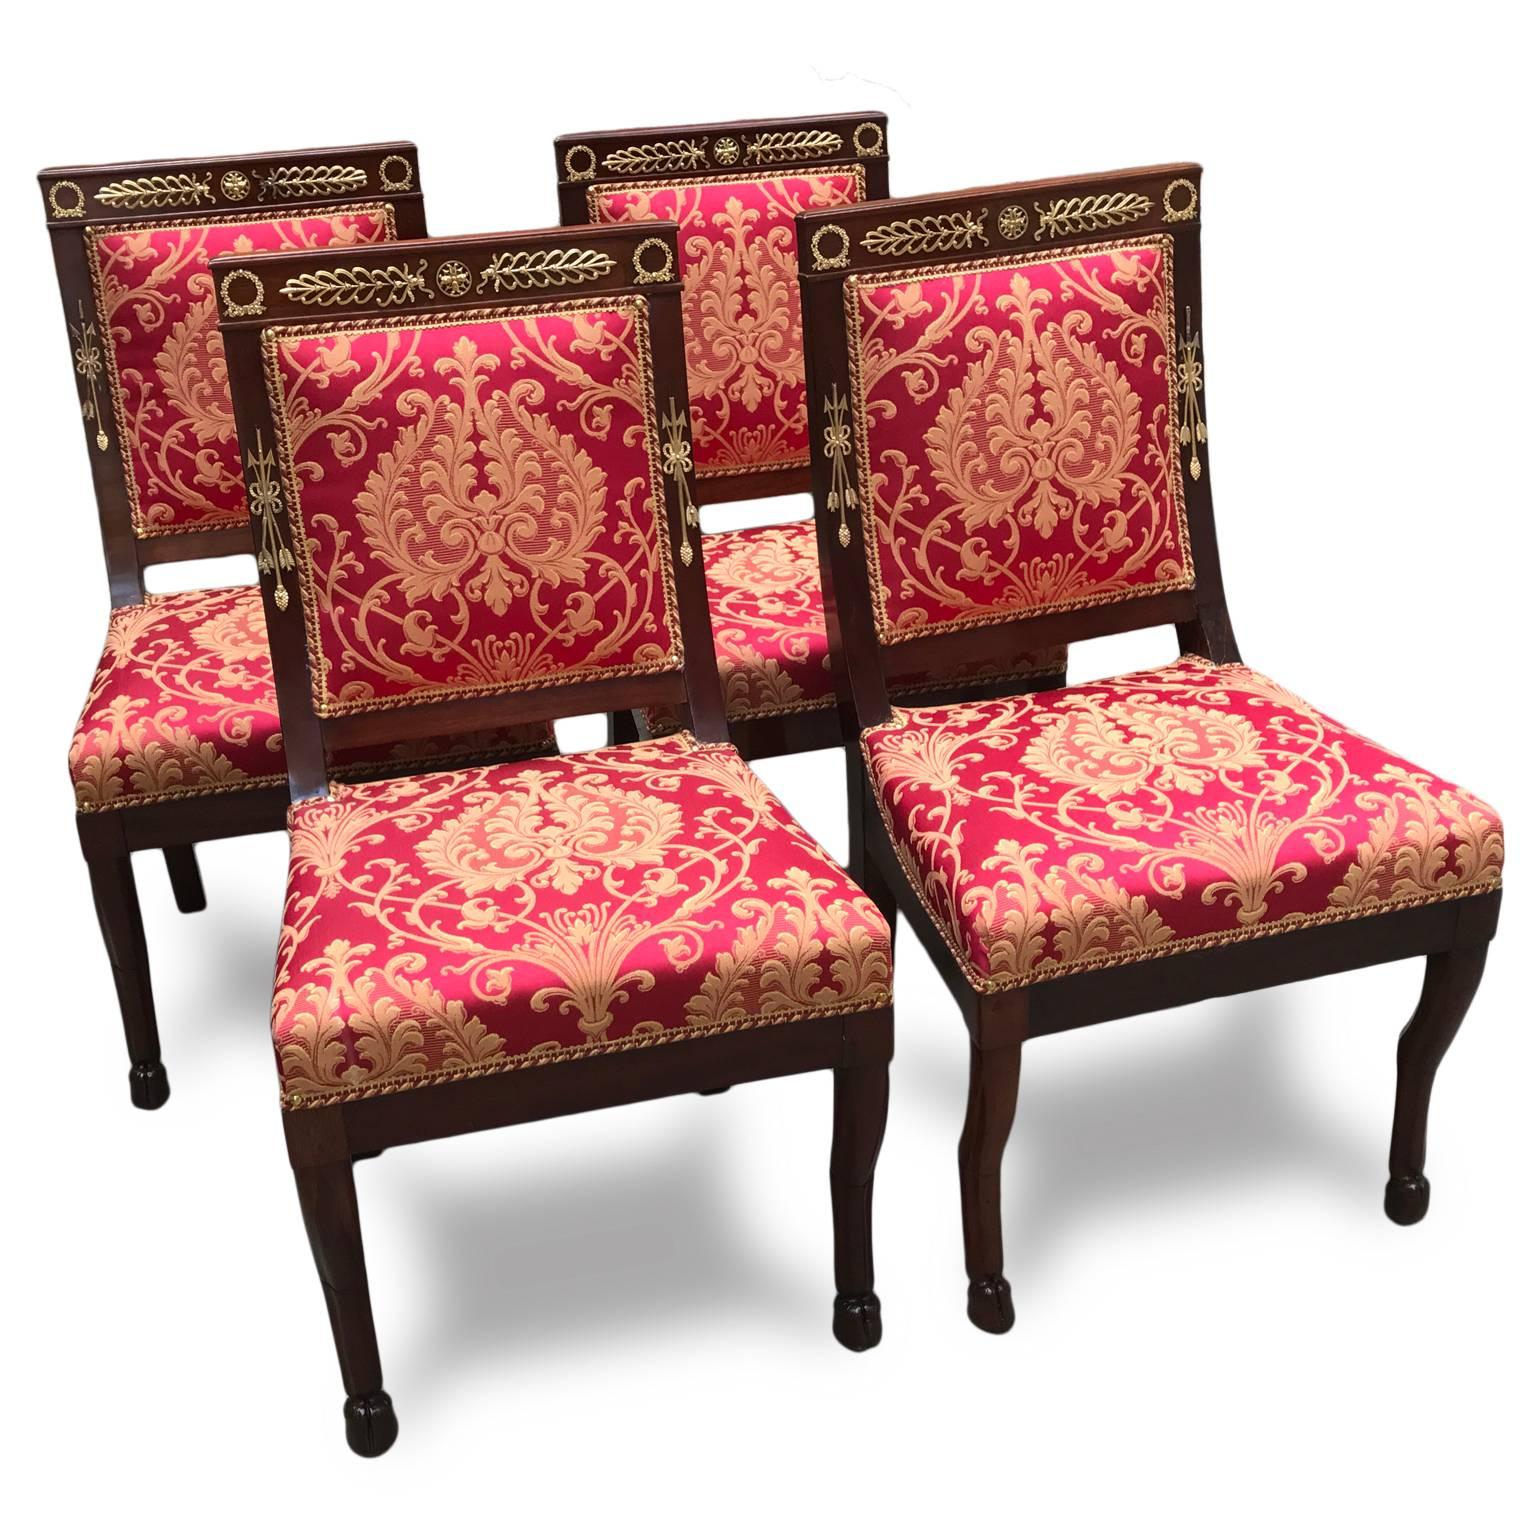 A set of four solid walnut chairs in the fabulous Empire style with ormolu decorations, made in Italy in the 20th century, in good condition.
The walnut frame is beautiful in color and has been embellished with striking ormolu mounts typical of the